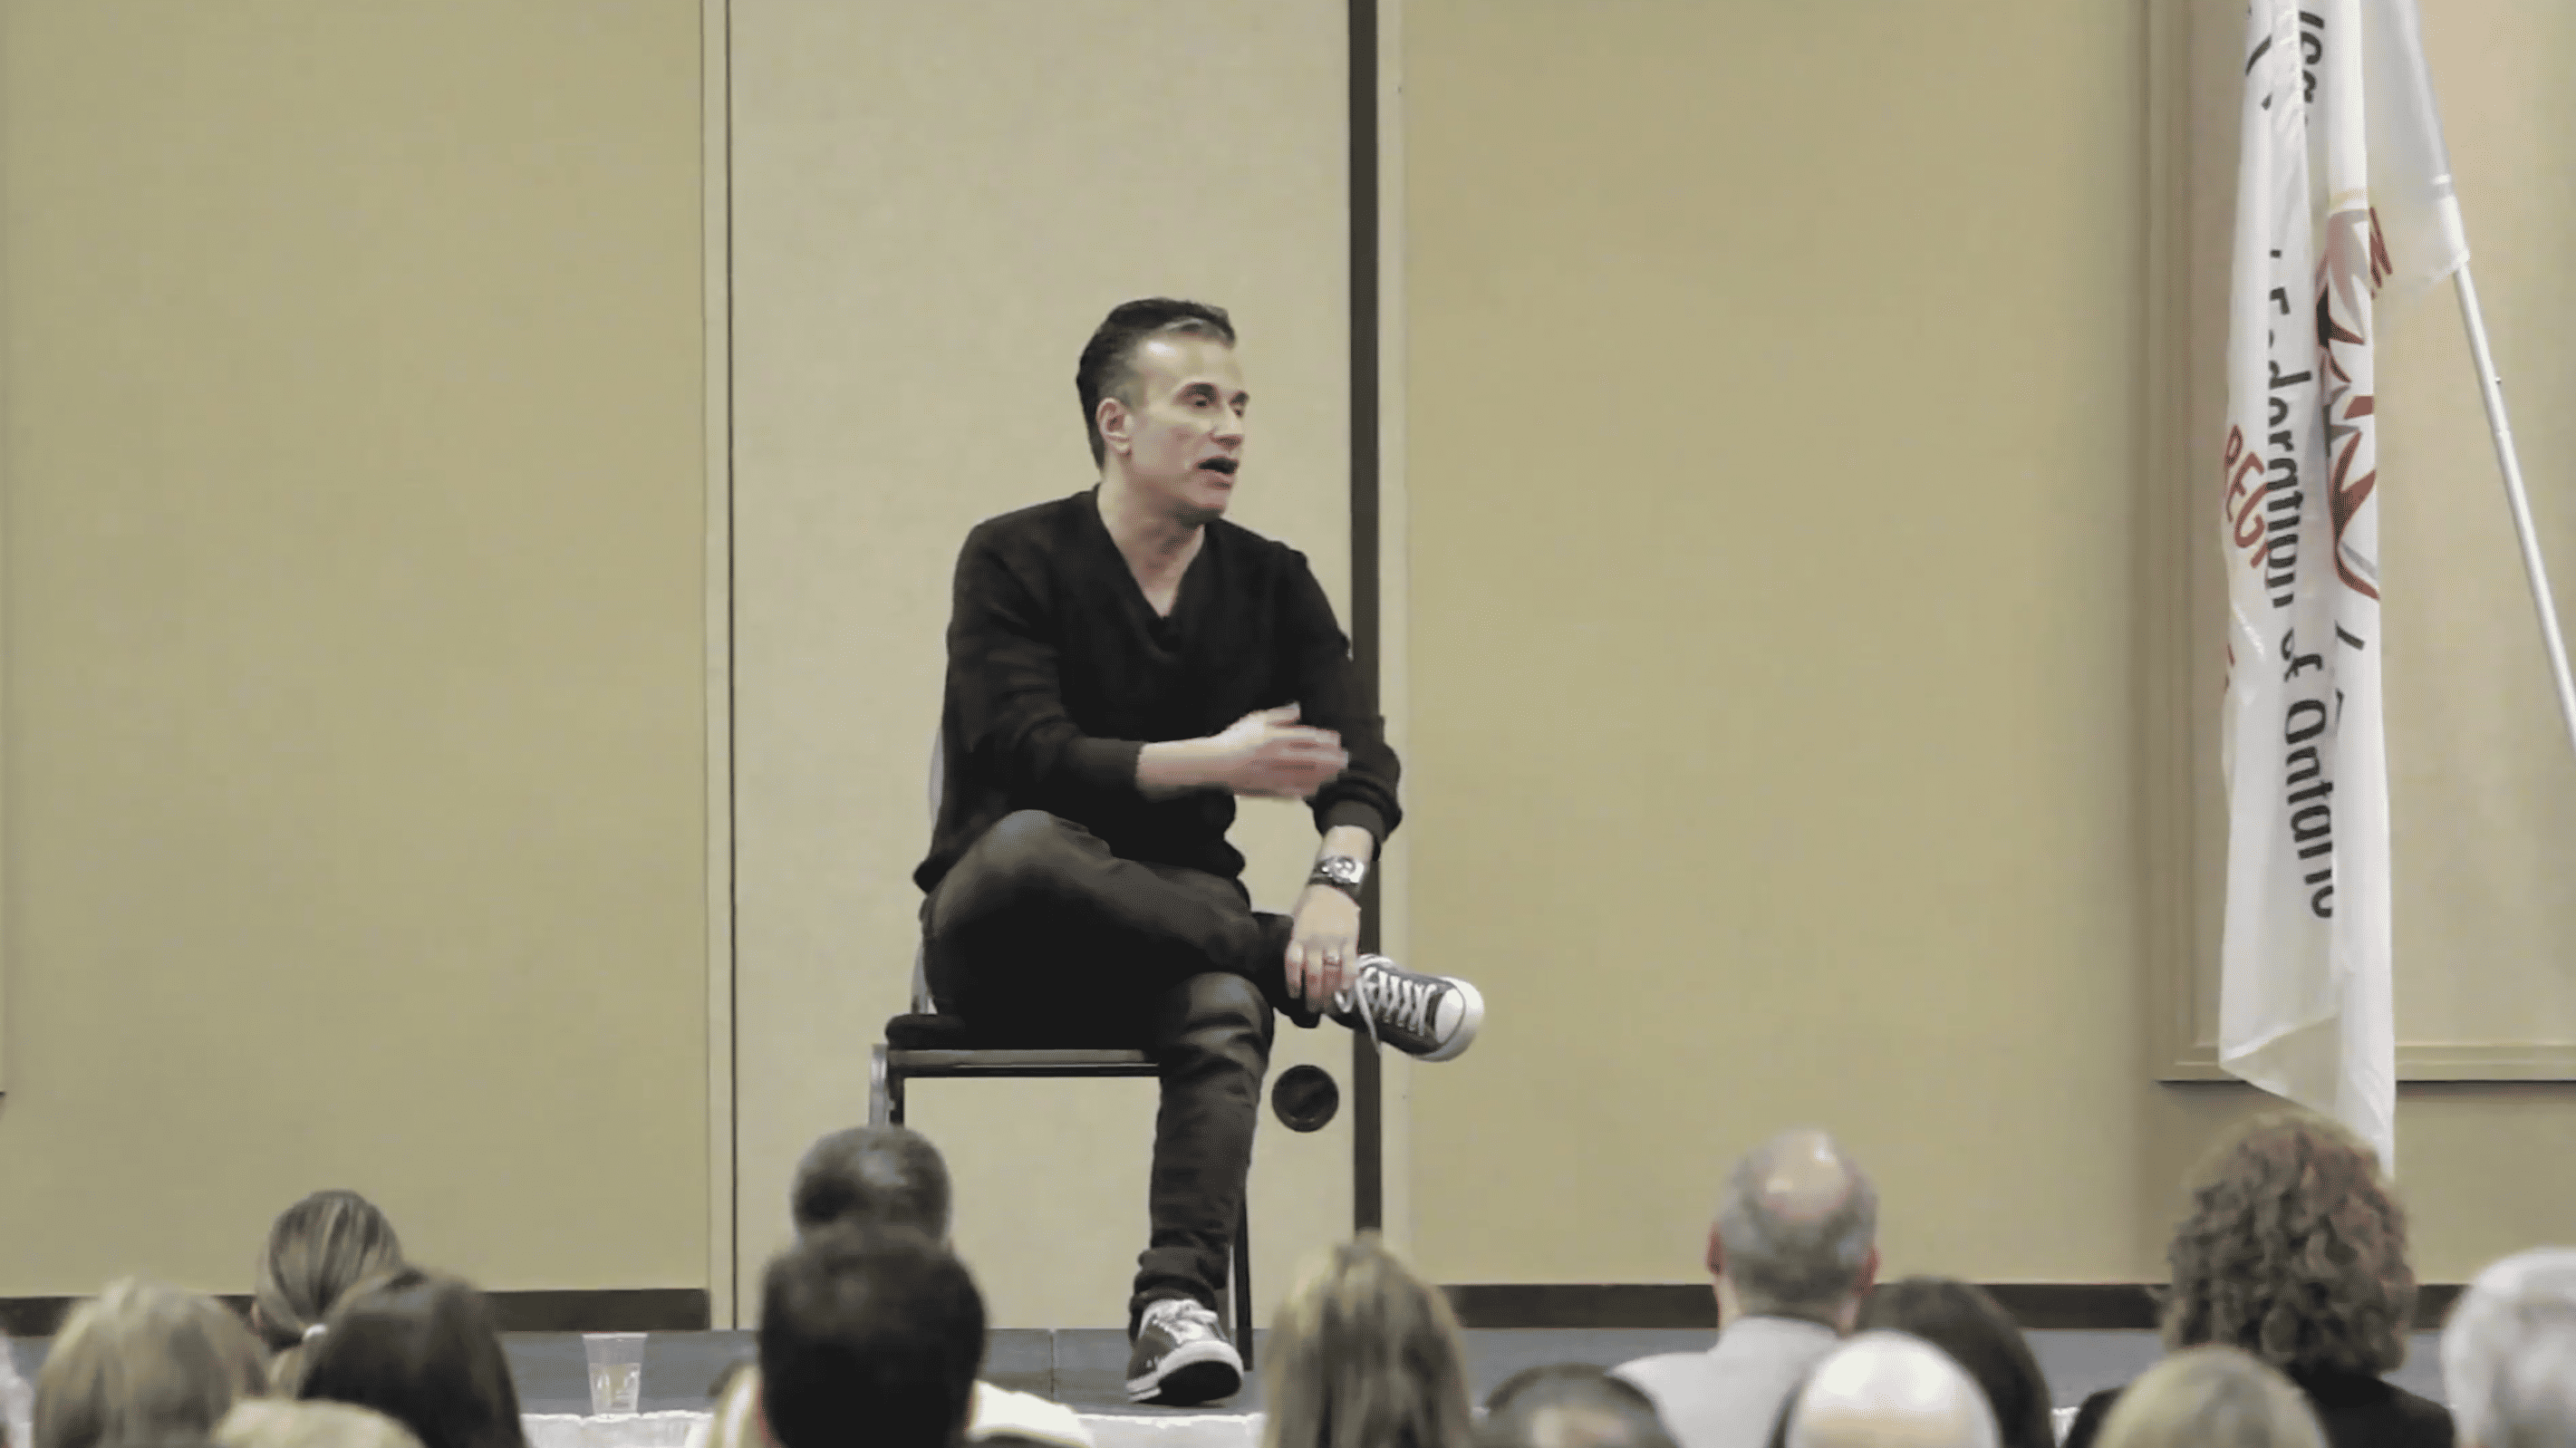 Michael Landsberg, a light-skinned man with dark hair, gives a talk onstage.